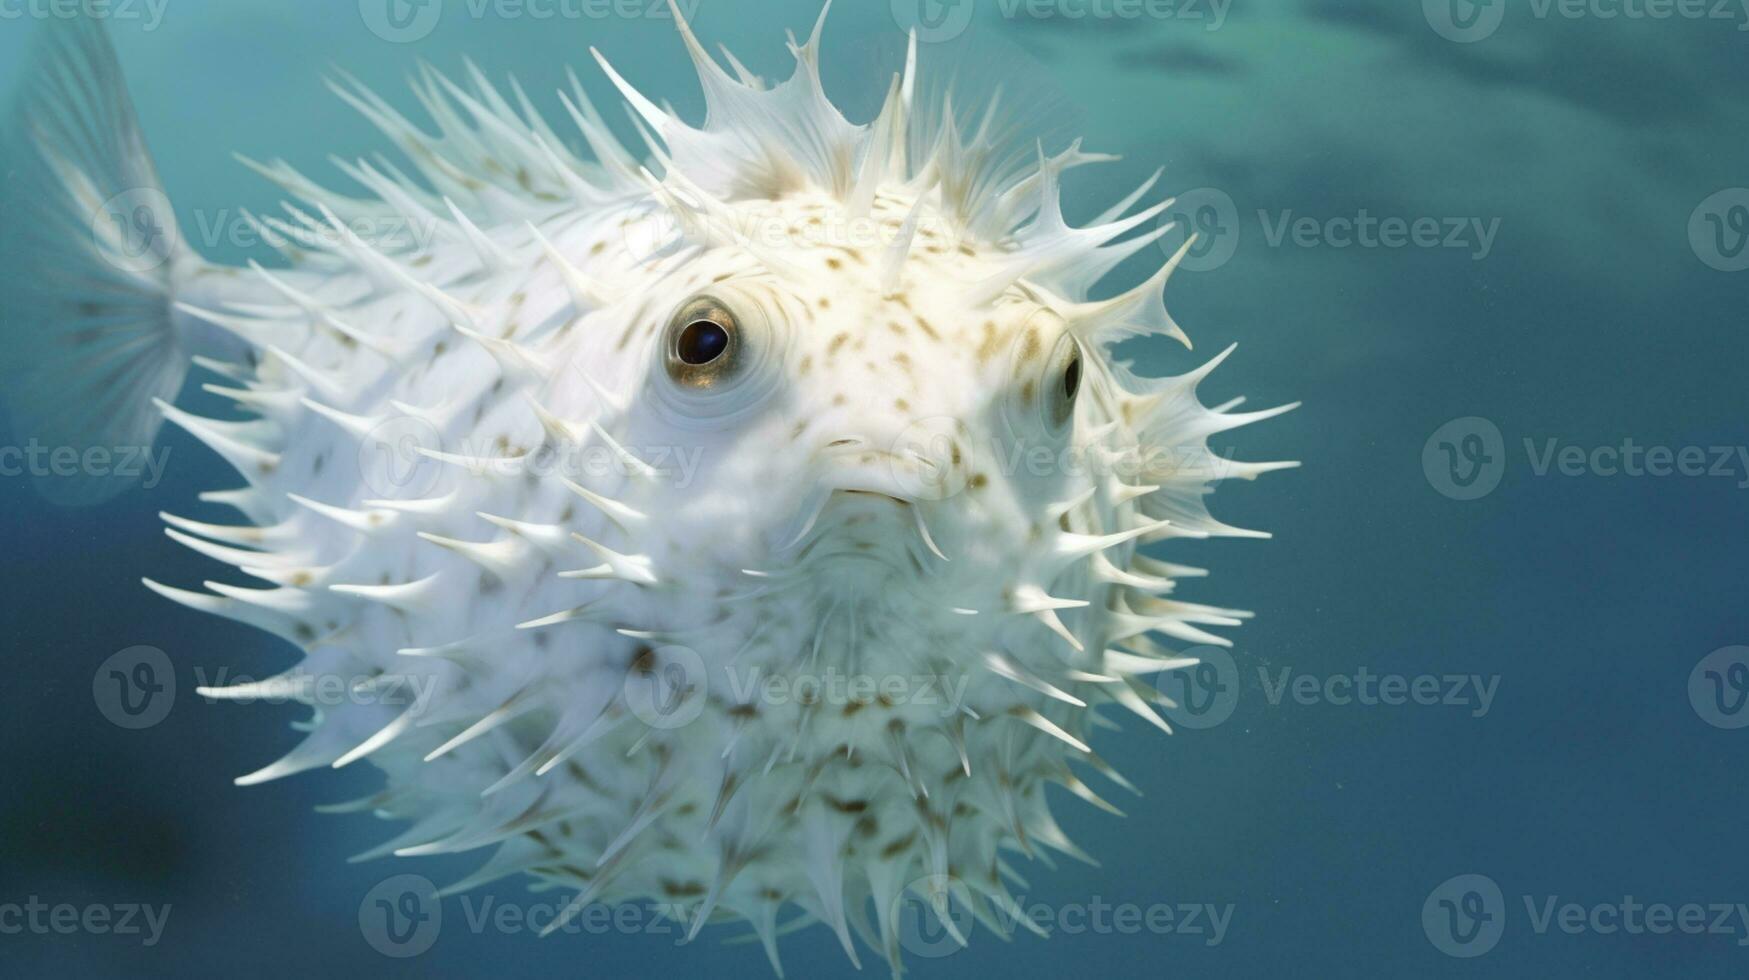 AI Generative of the pufferfish is a small, round fish with spiky, inflated skin. Its body is covered in tiny, sharp spines, and it has large, expressive eyes. photo